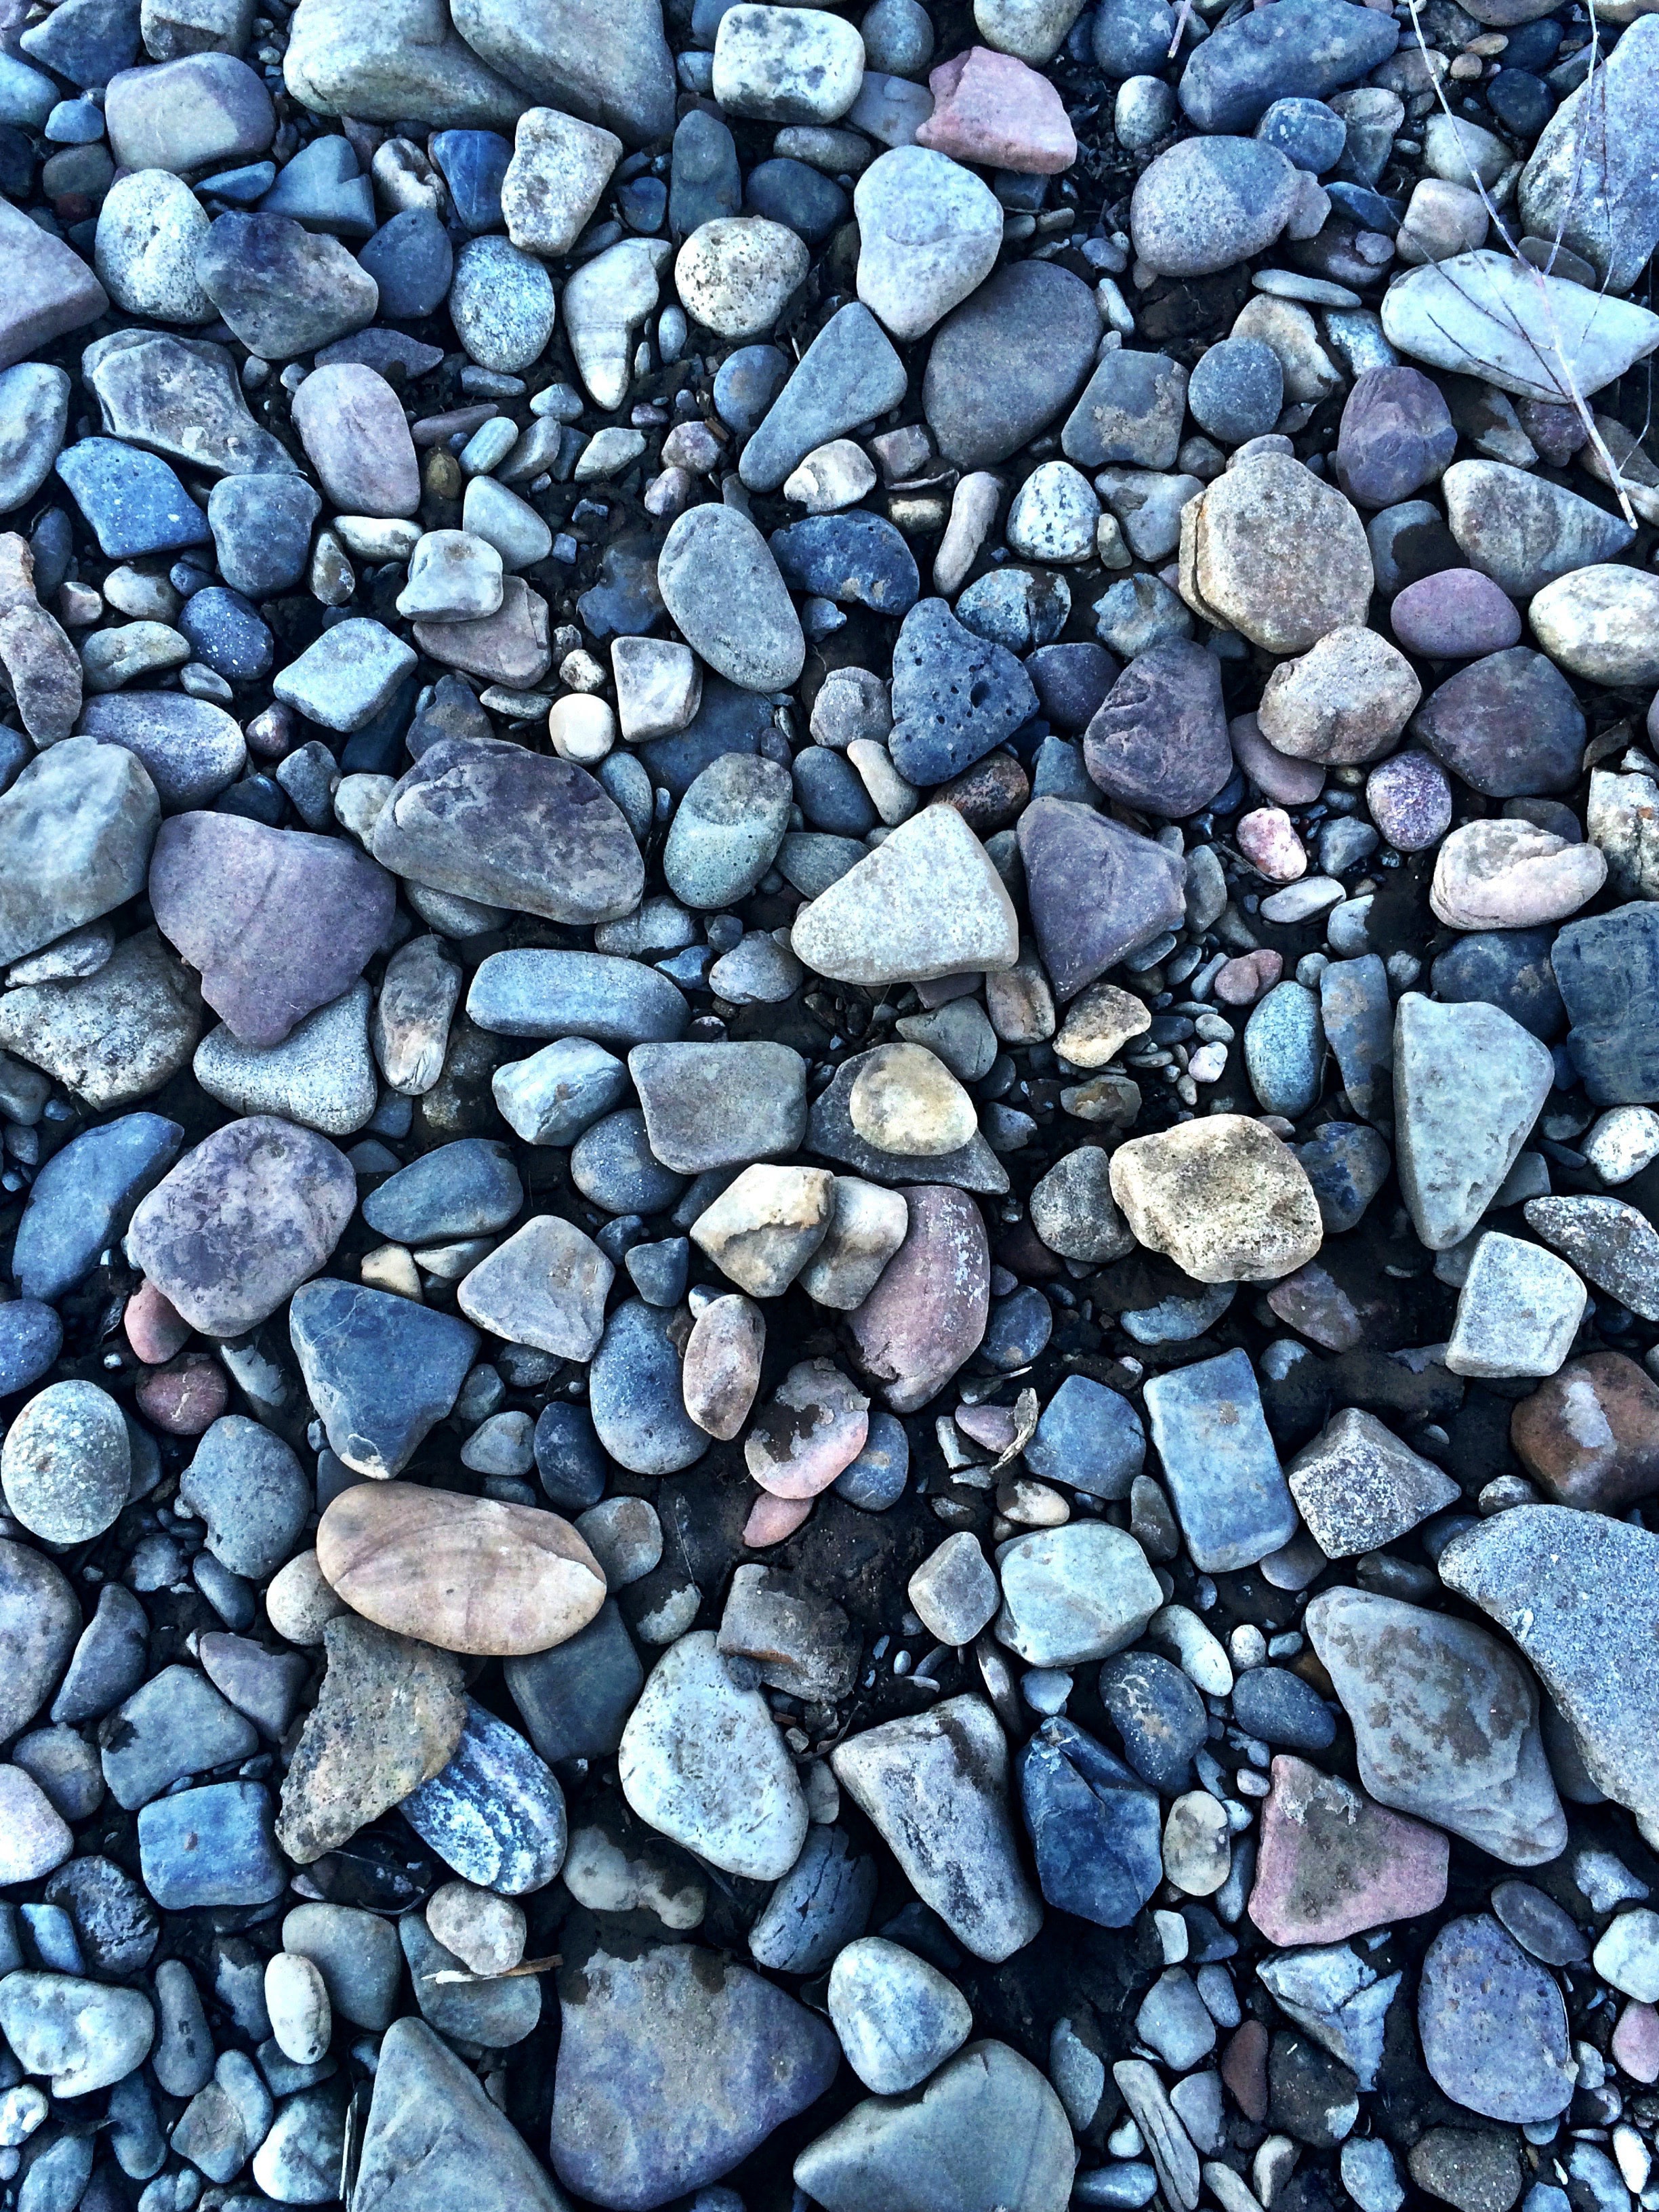 105469 download wallpaper stones, pebble, texture, textures, grey screensavers and pictures for free